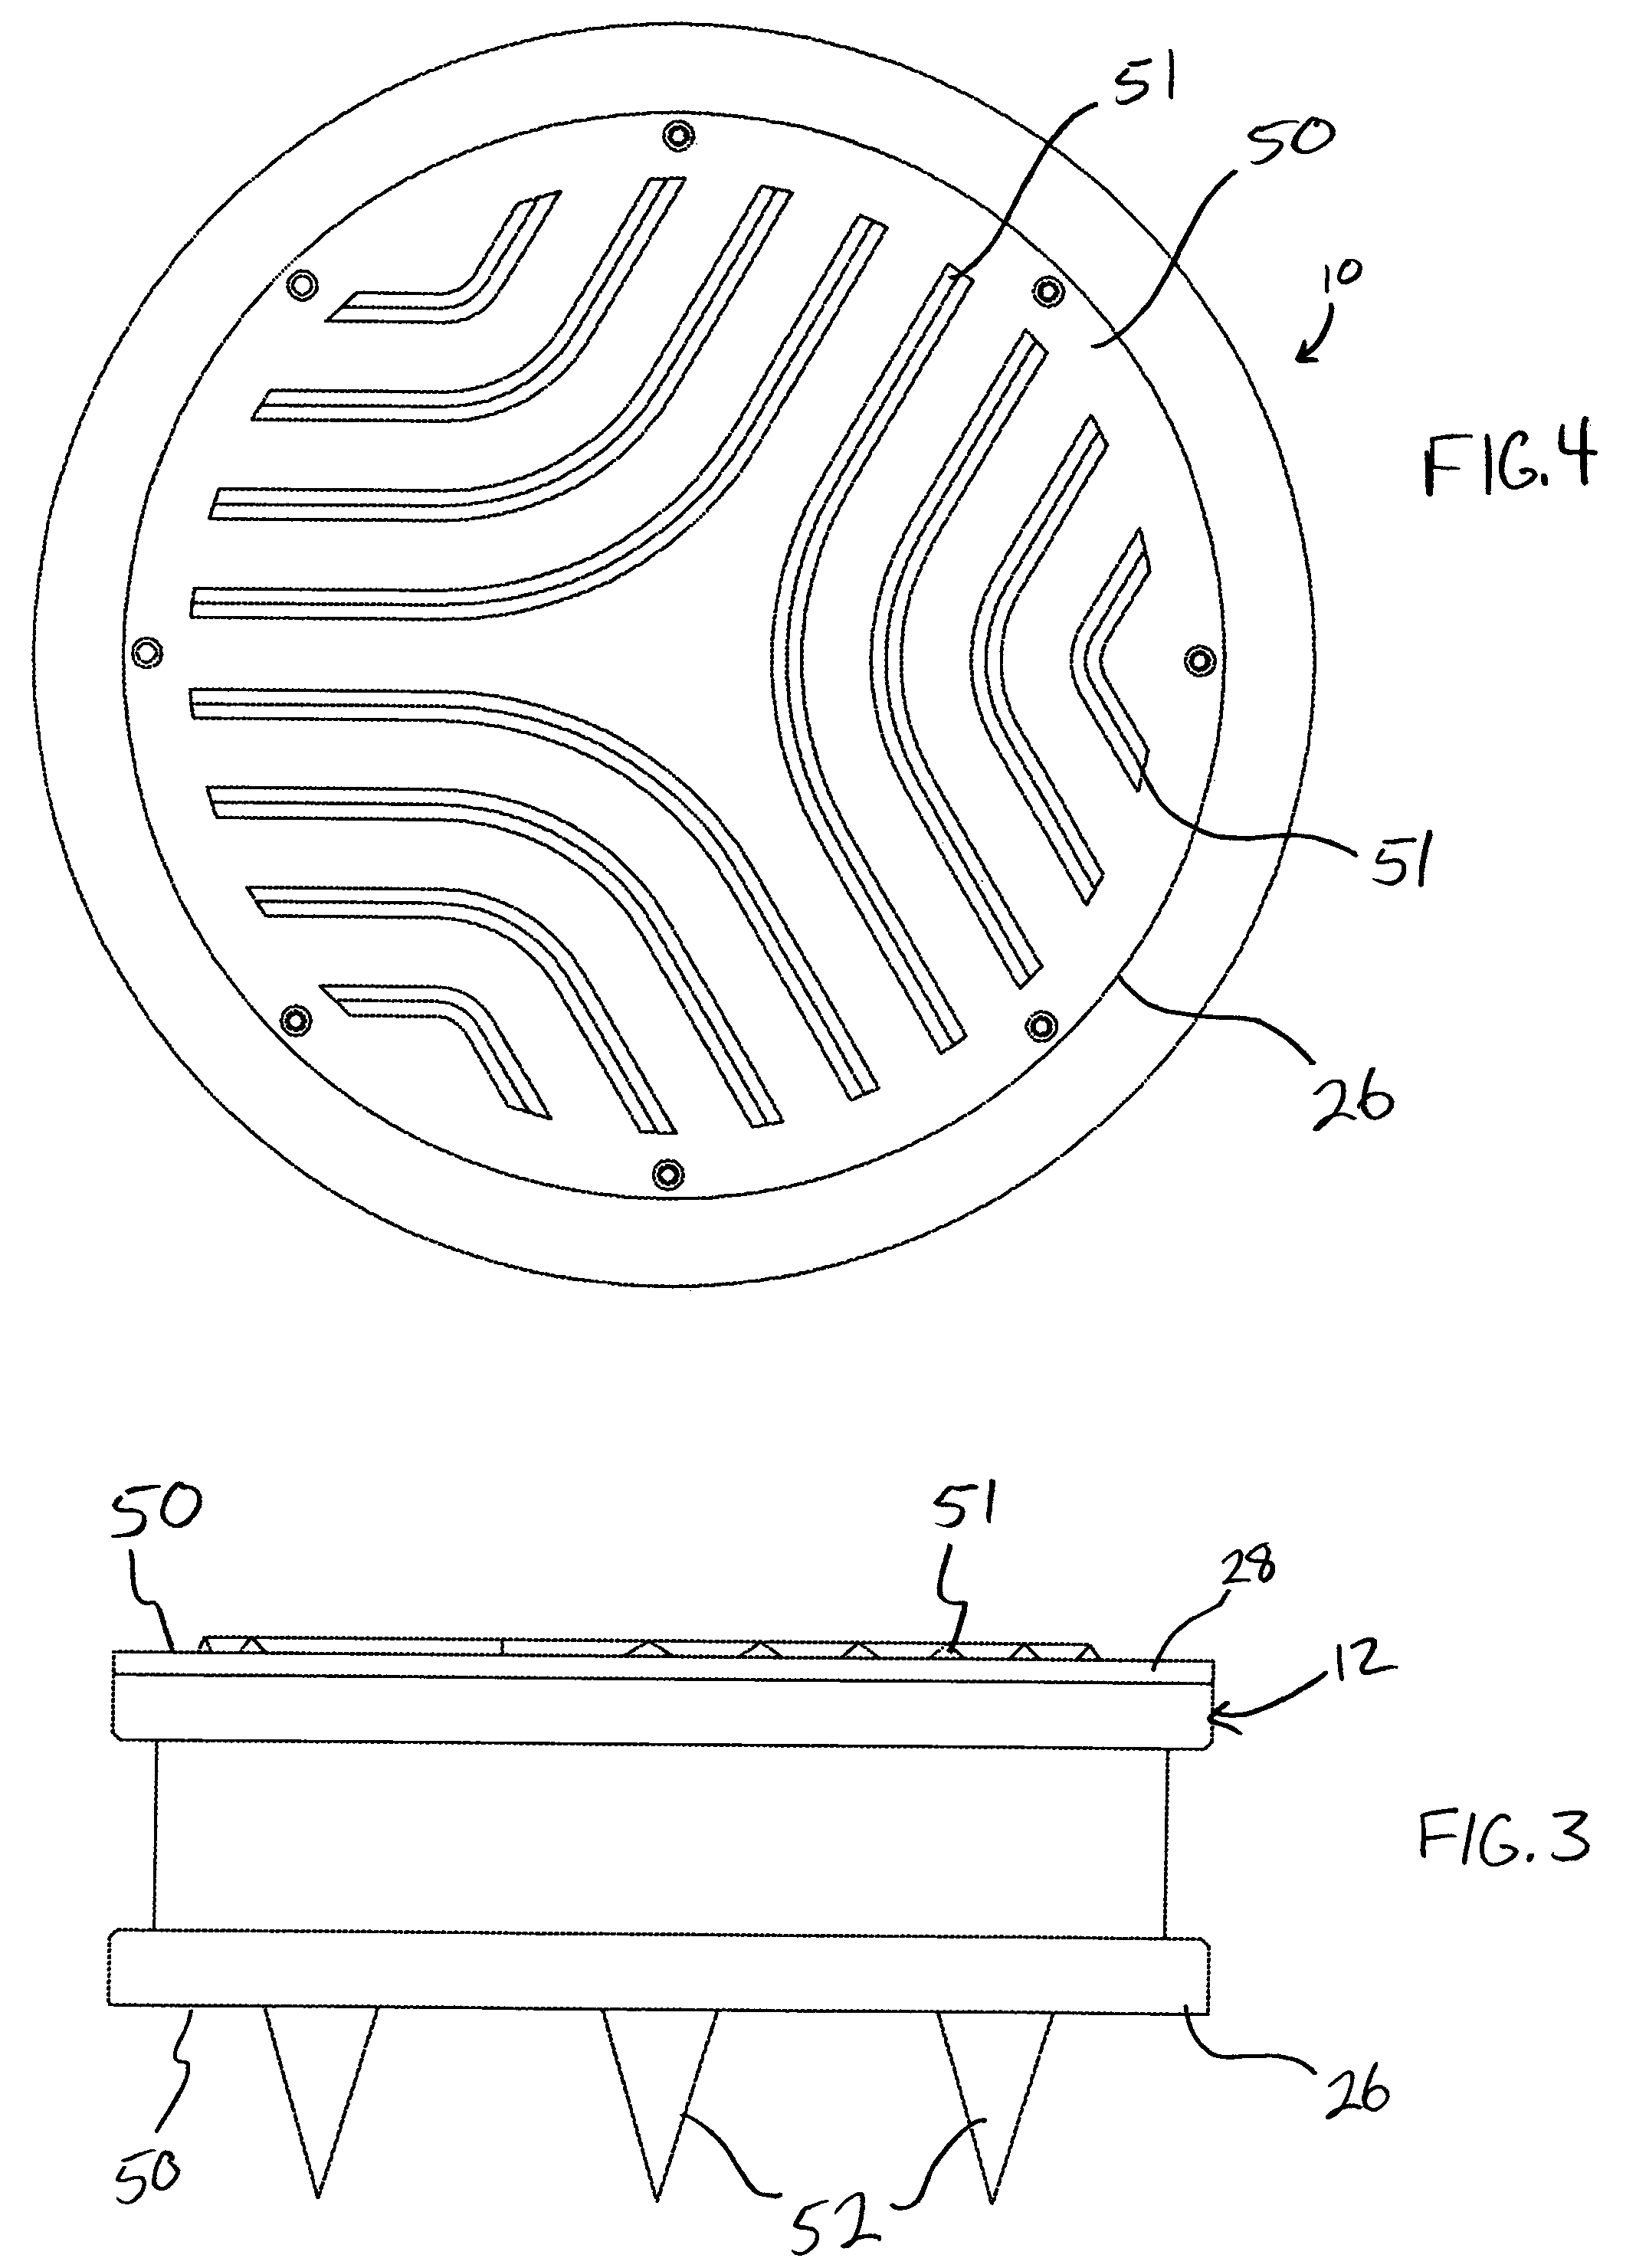 Method and apparatus for land based seismic data acquisition